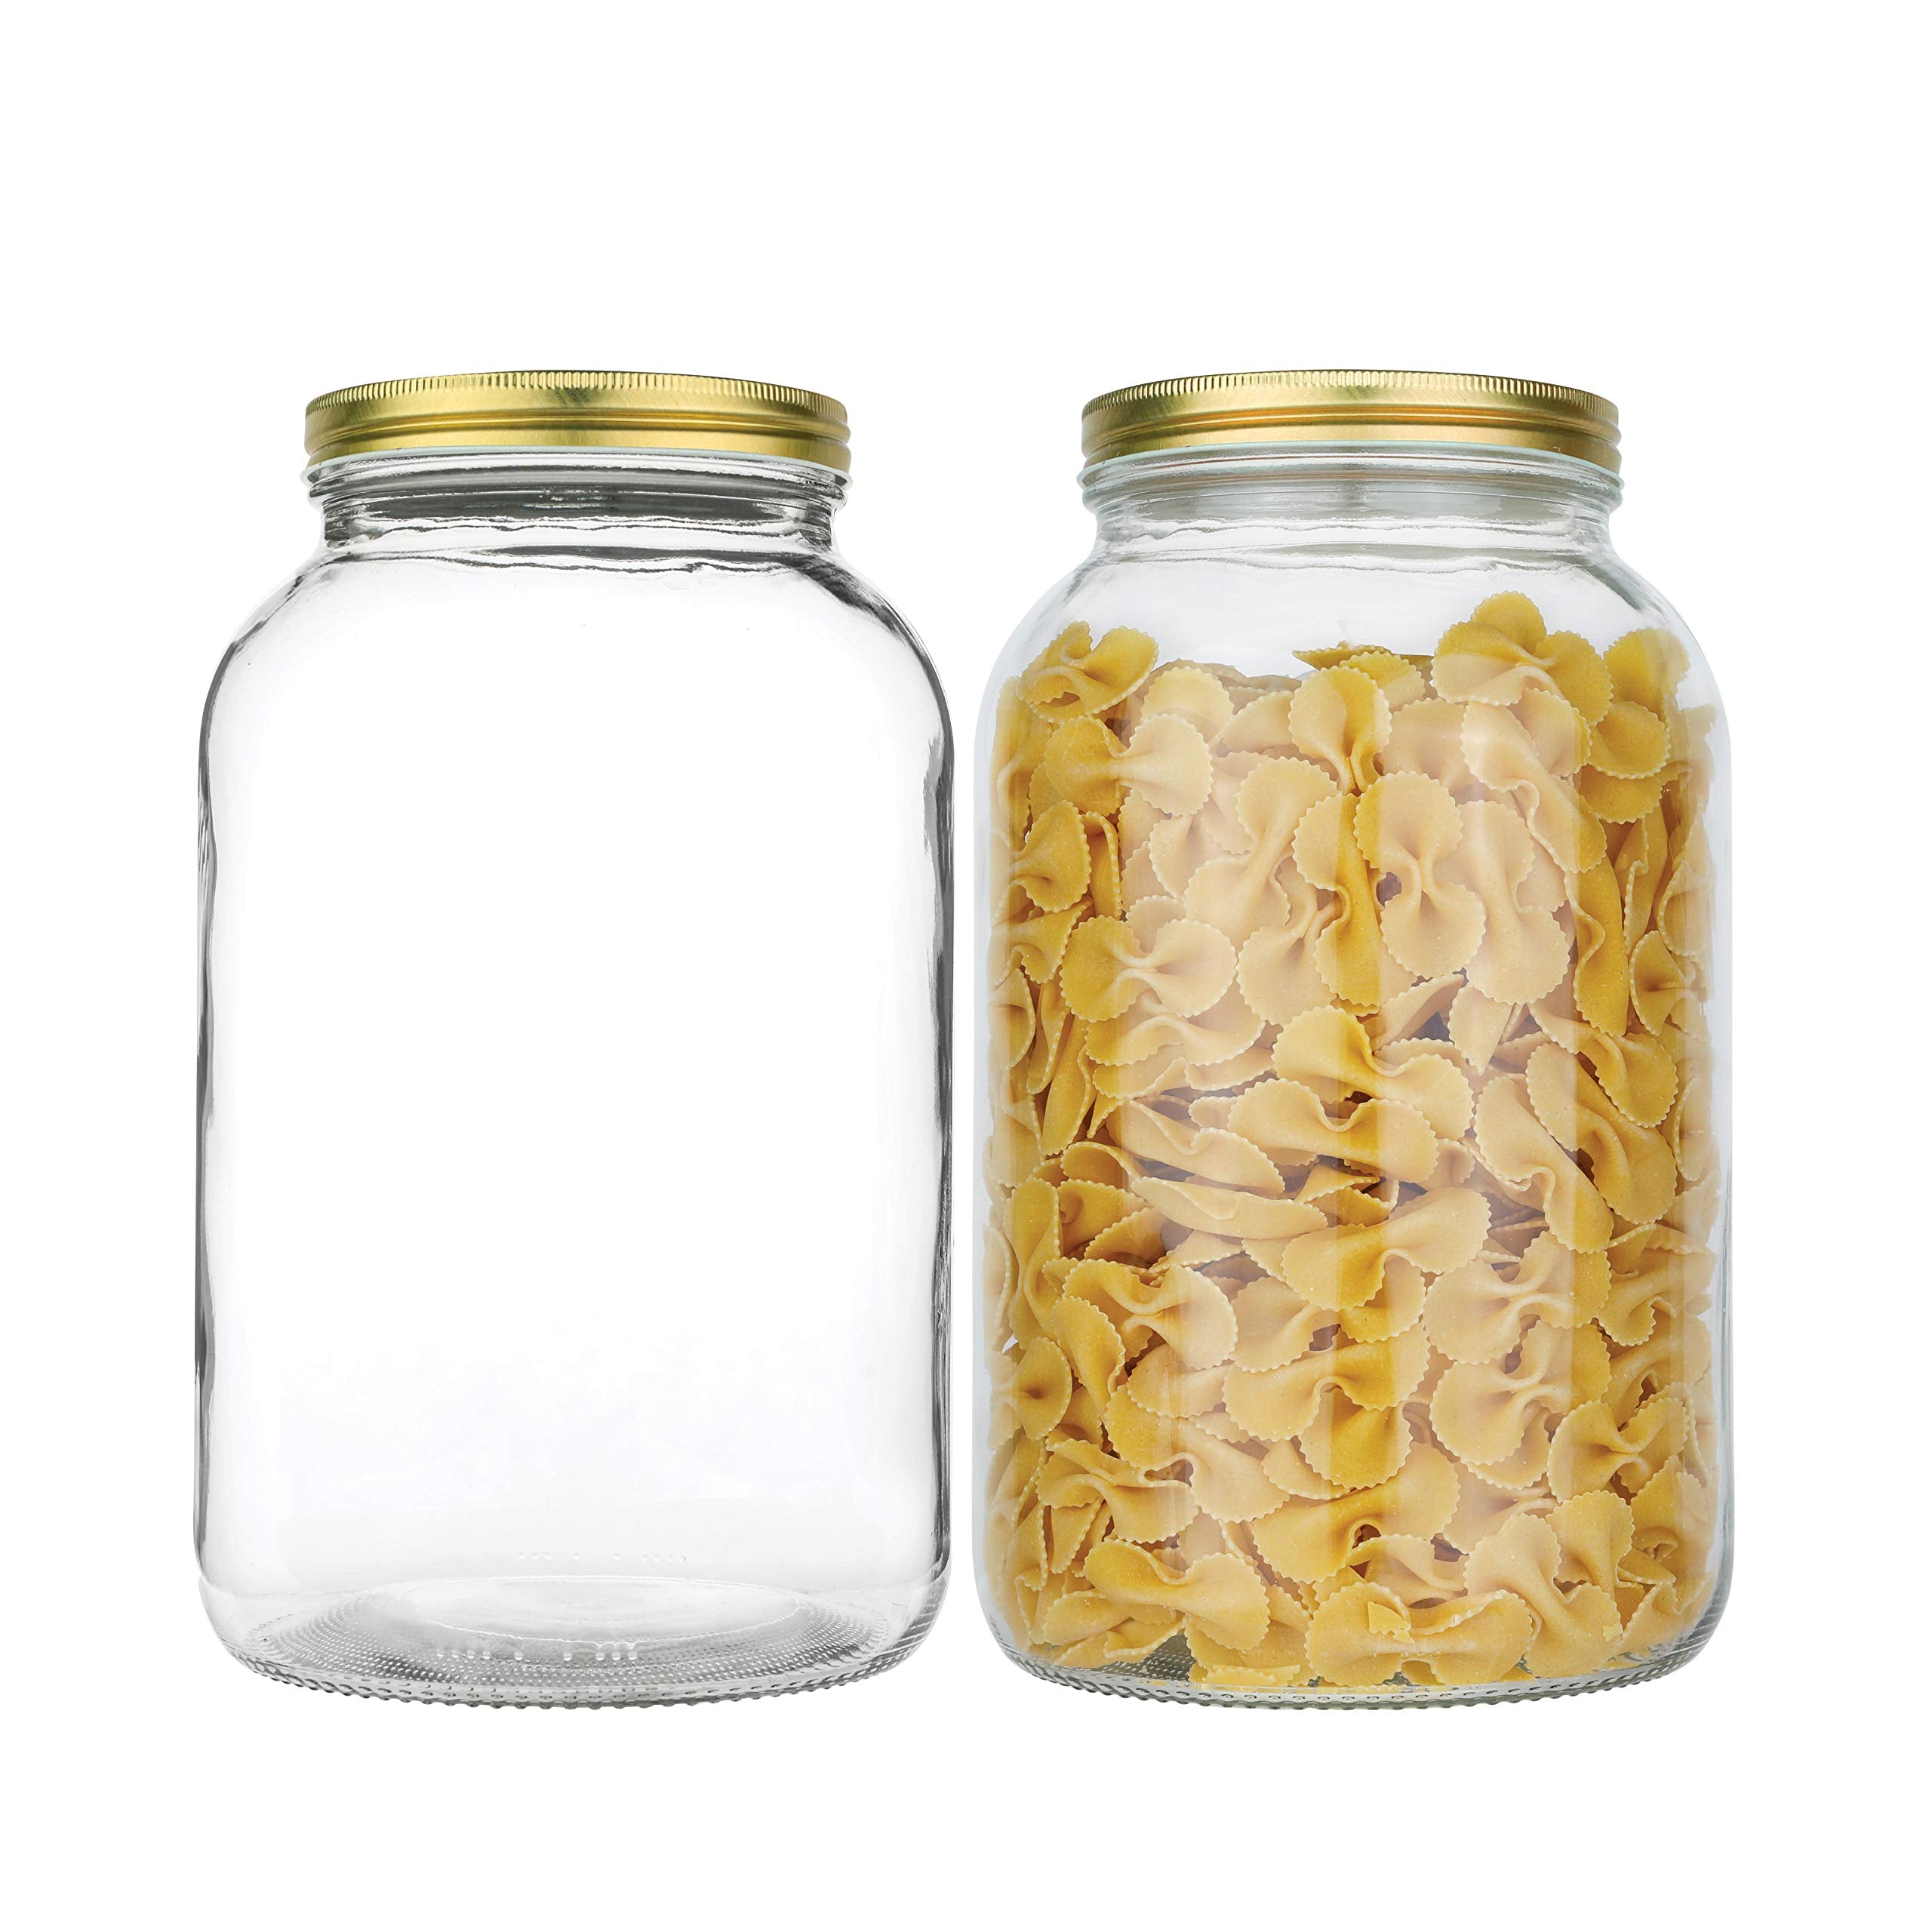 2 Pack - 1 Gallon Glass Mason Jar Wide Mouth with Airtight Metal Lid - Safe for Fermenting Kombucha Kefir - Pickling, Storing and Canning- BPA-Free Dishwasher Safe- By Kitchentoolz  - Like New